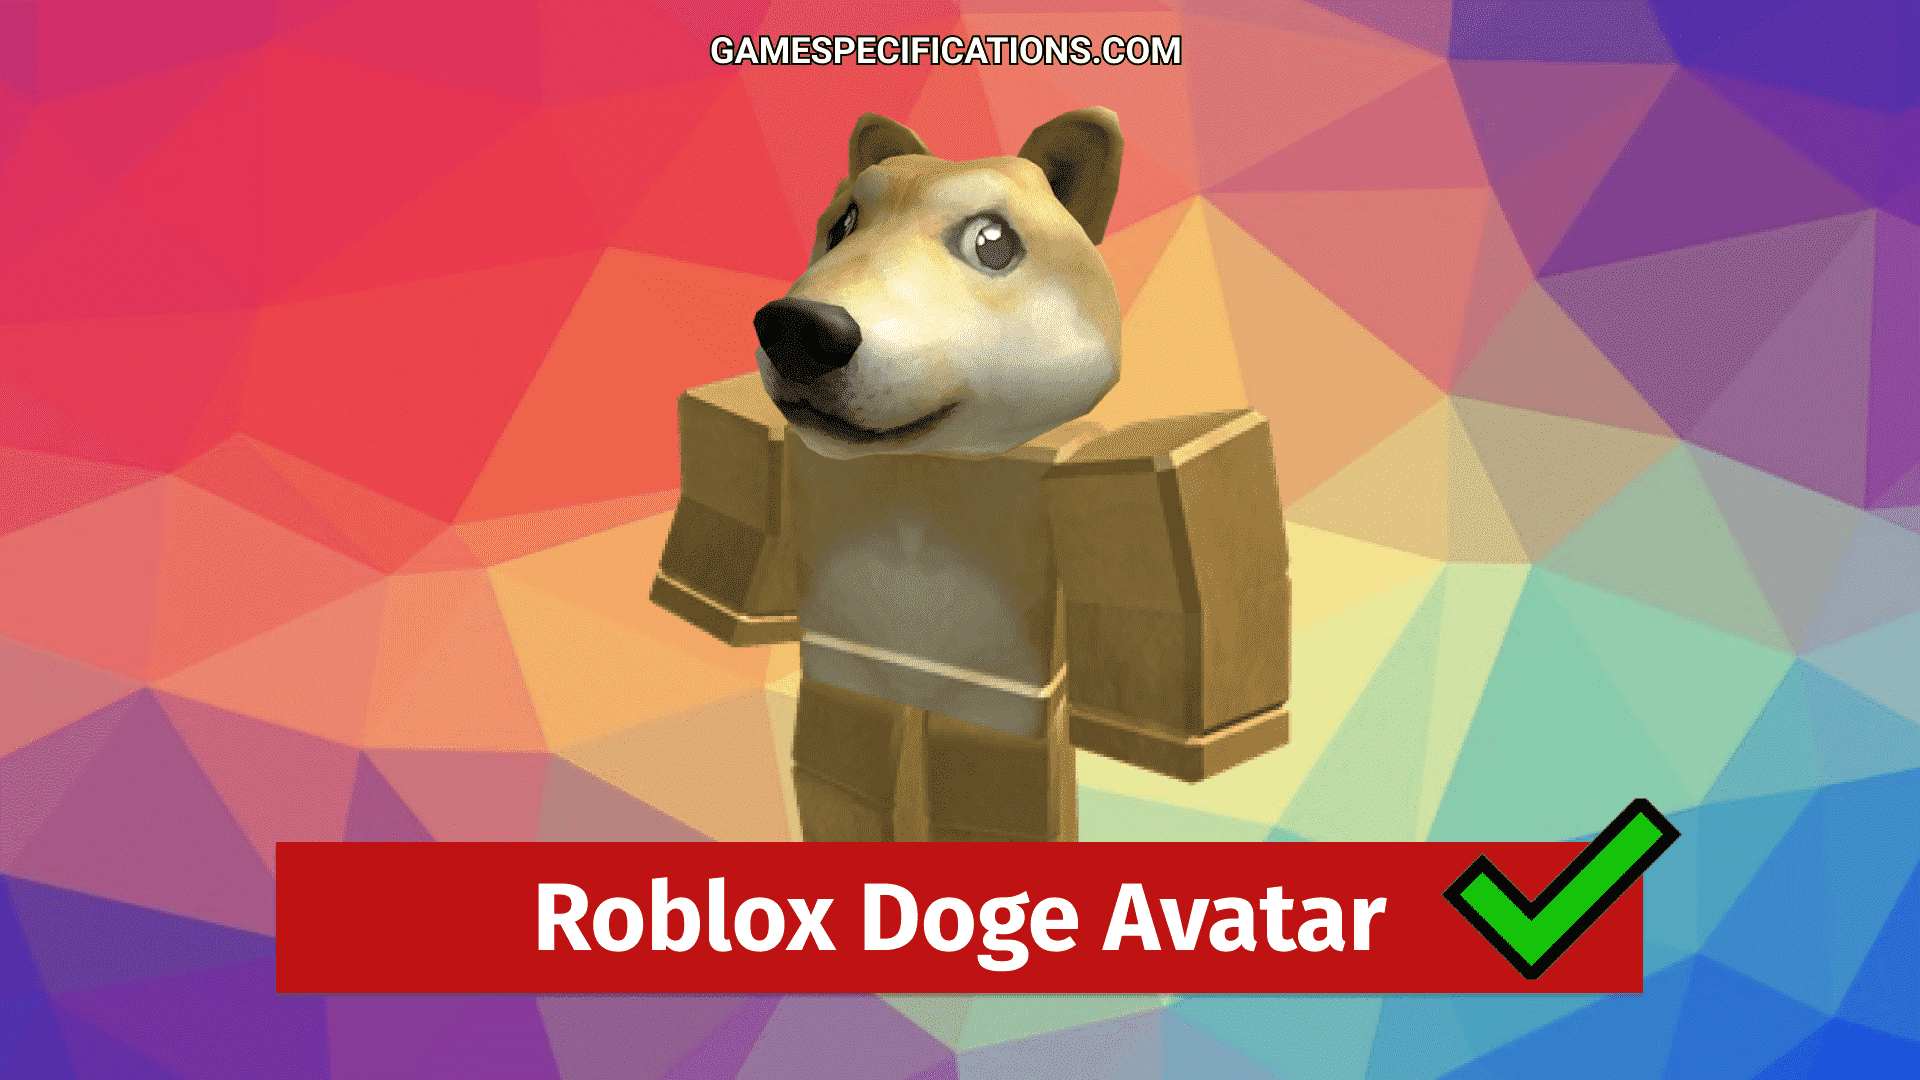 Awesome Roblox Doge Avatar Guide Game Specifications - doge bunny shirt roblox